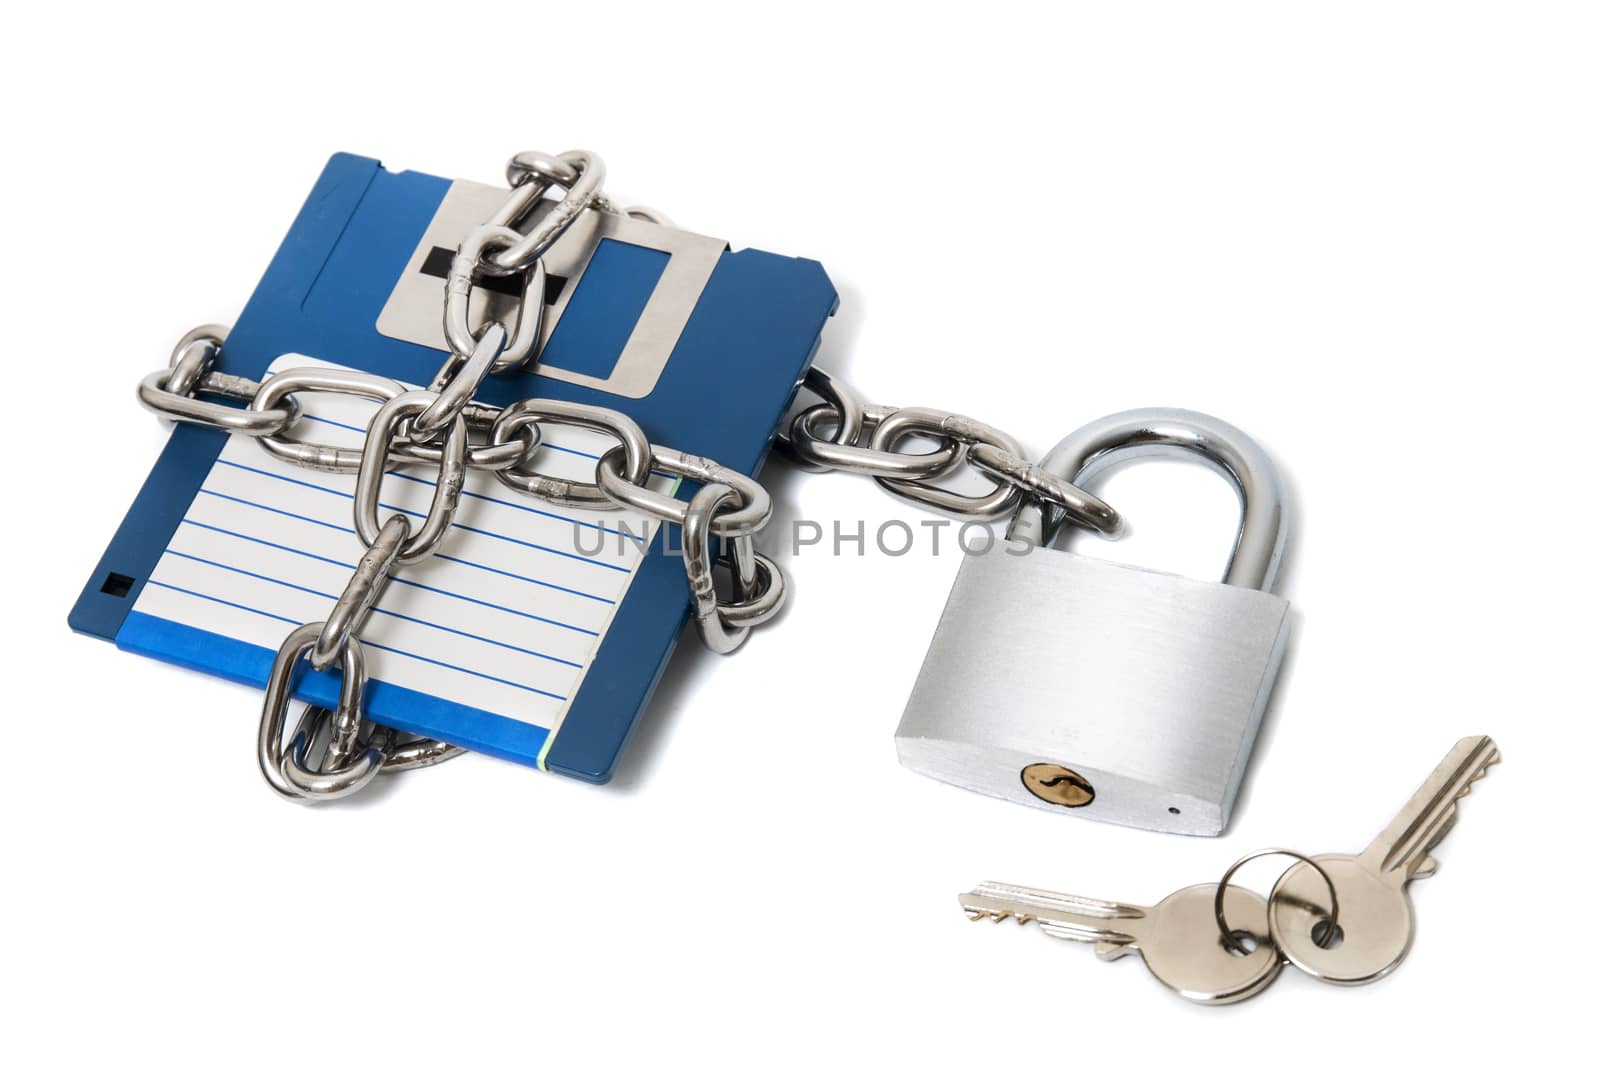 padlock with floppy disk and chain isolated on a white background.